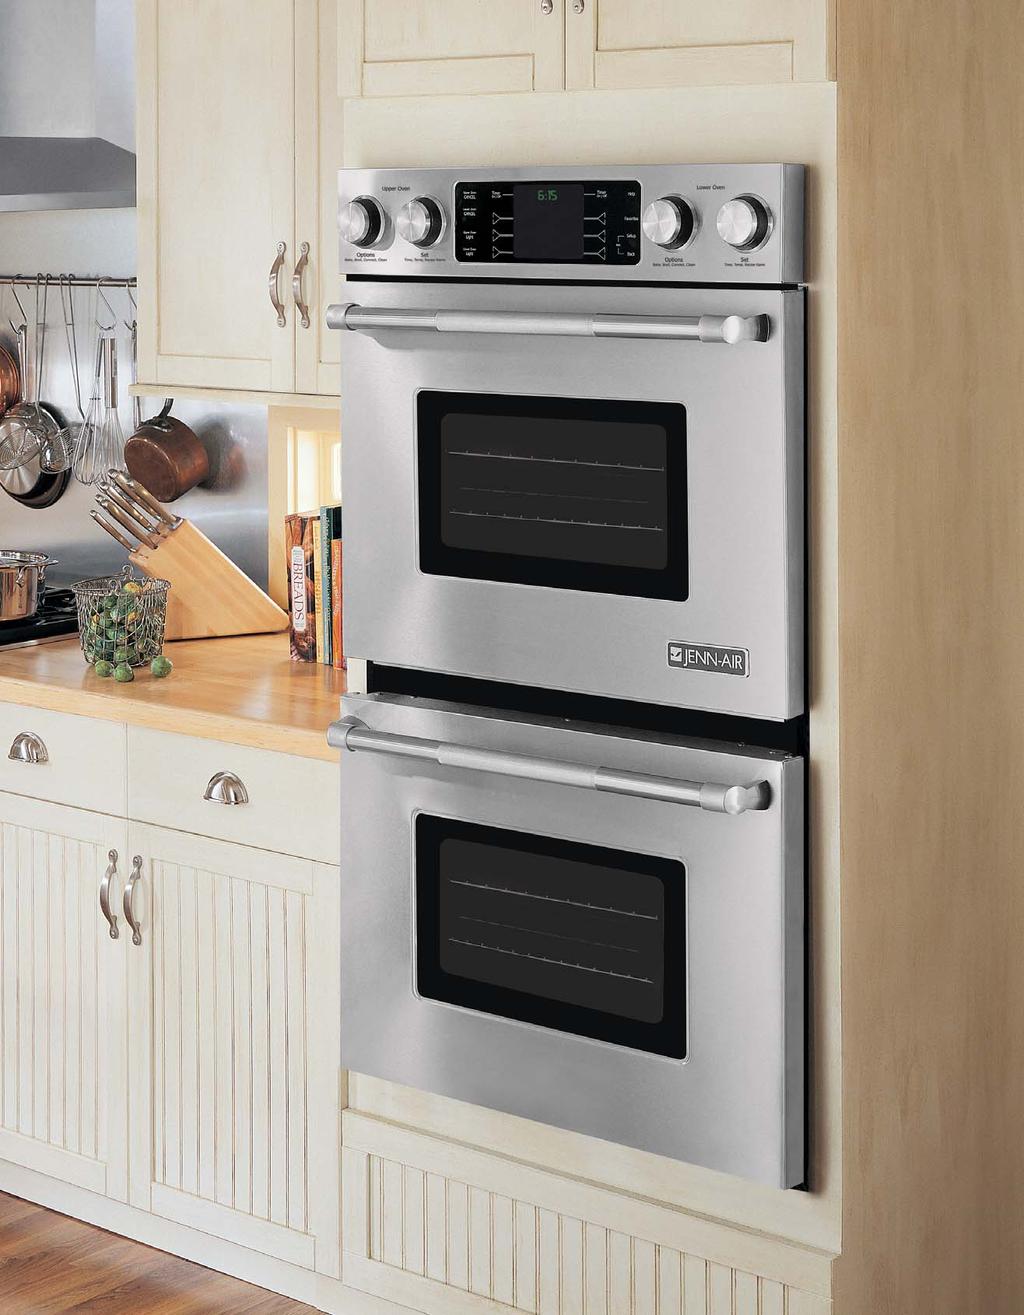 PRO-STYLE WALL OVENS SHOWN: JJW9830DDP 30"